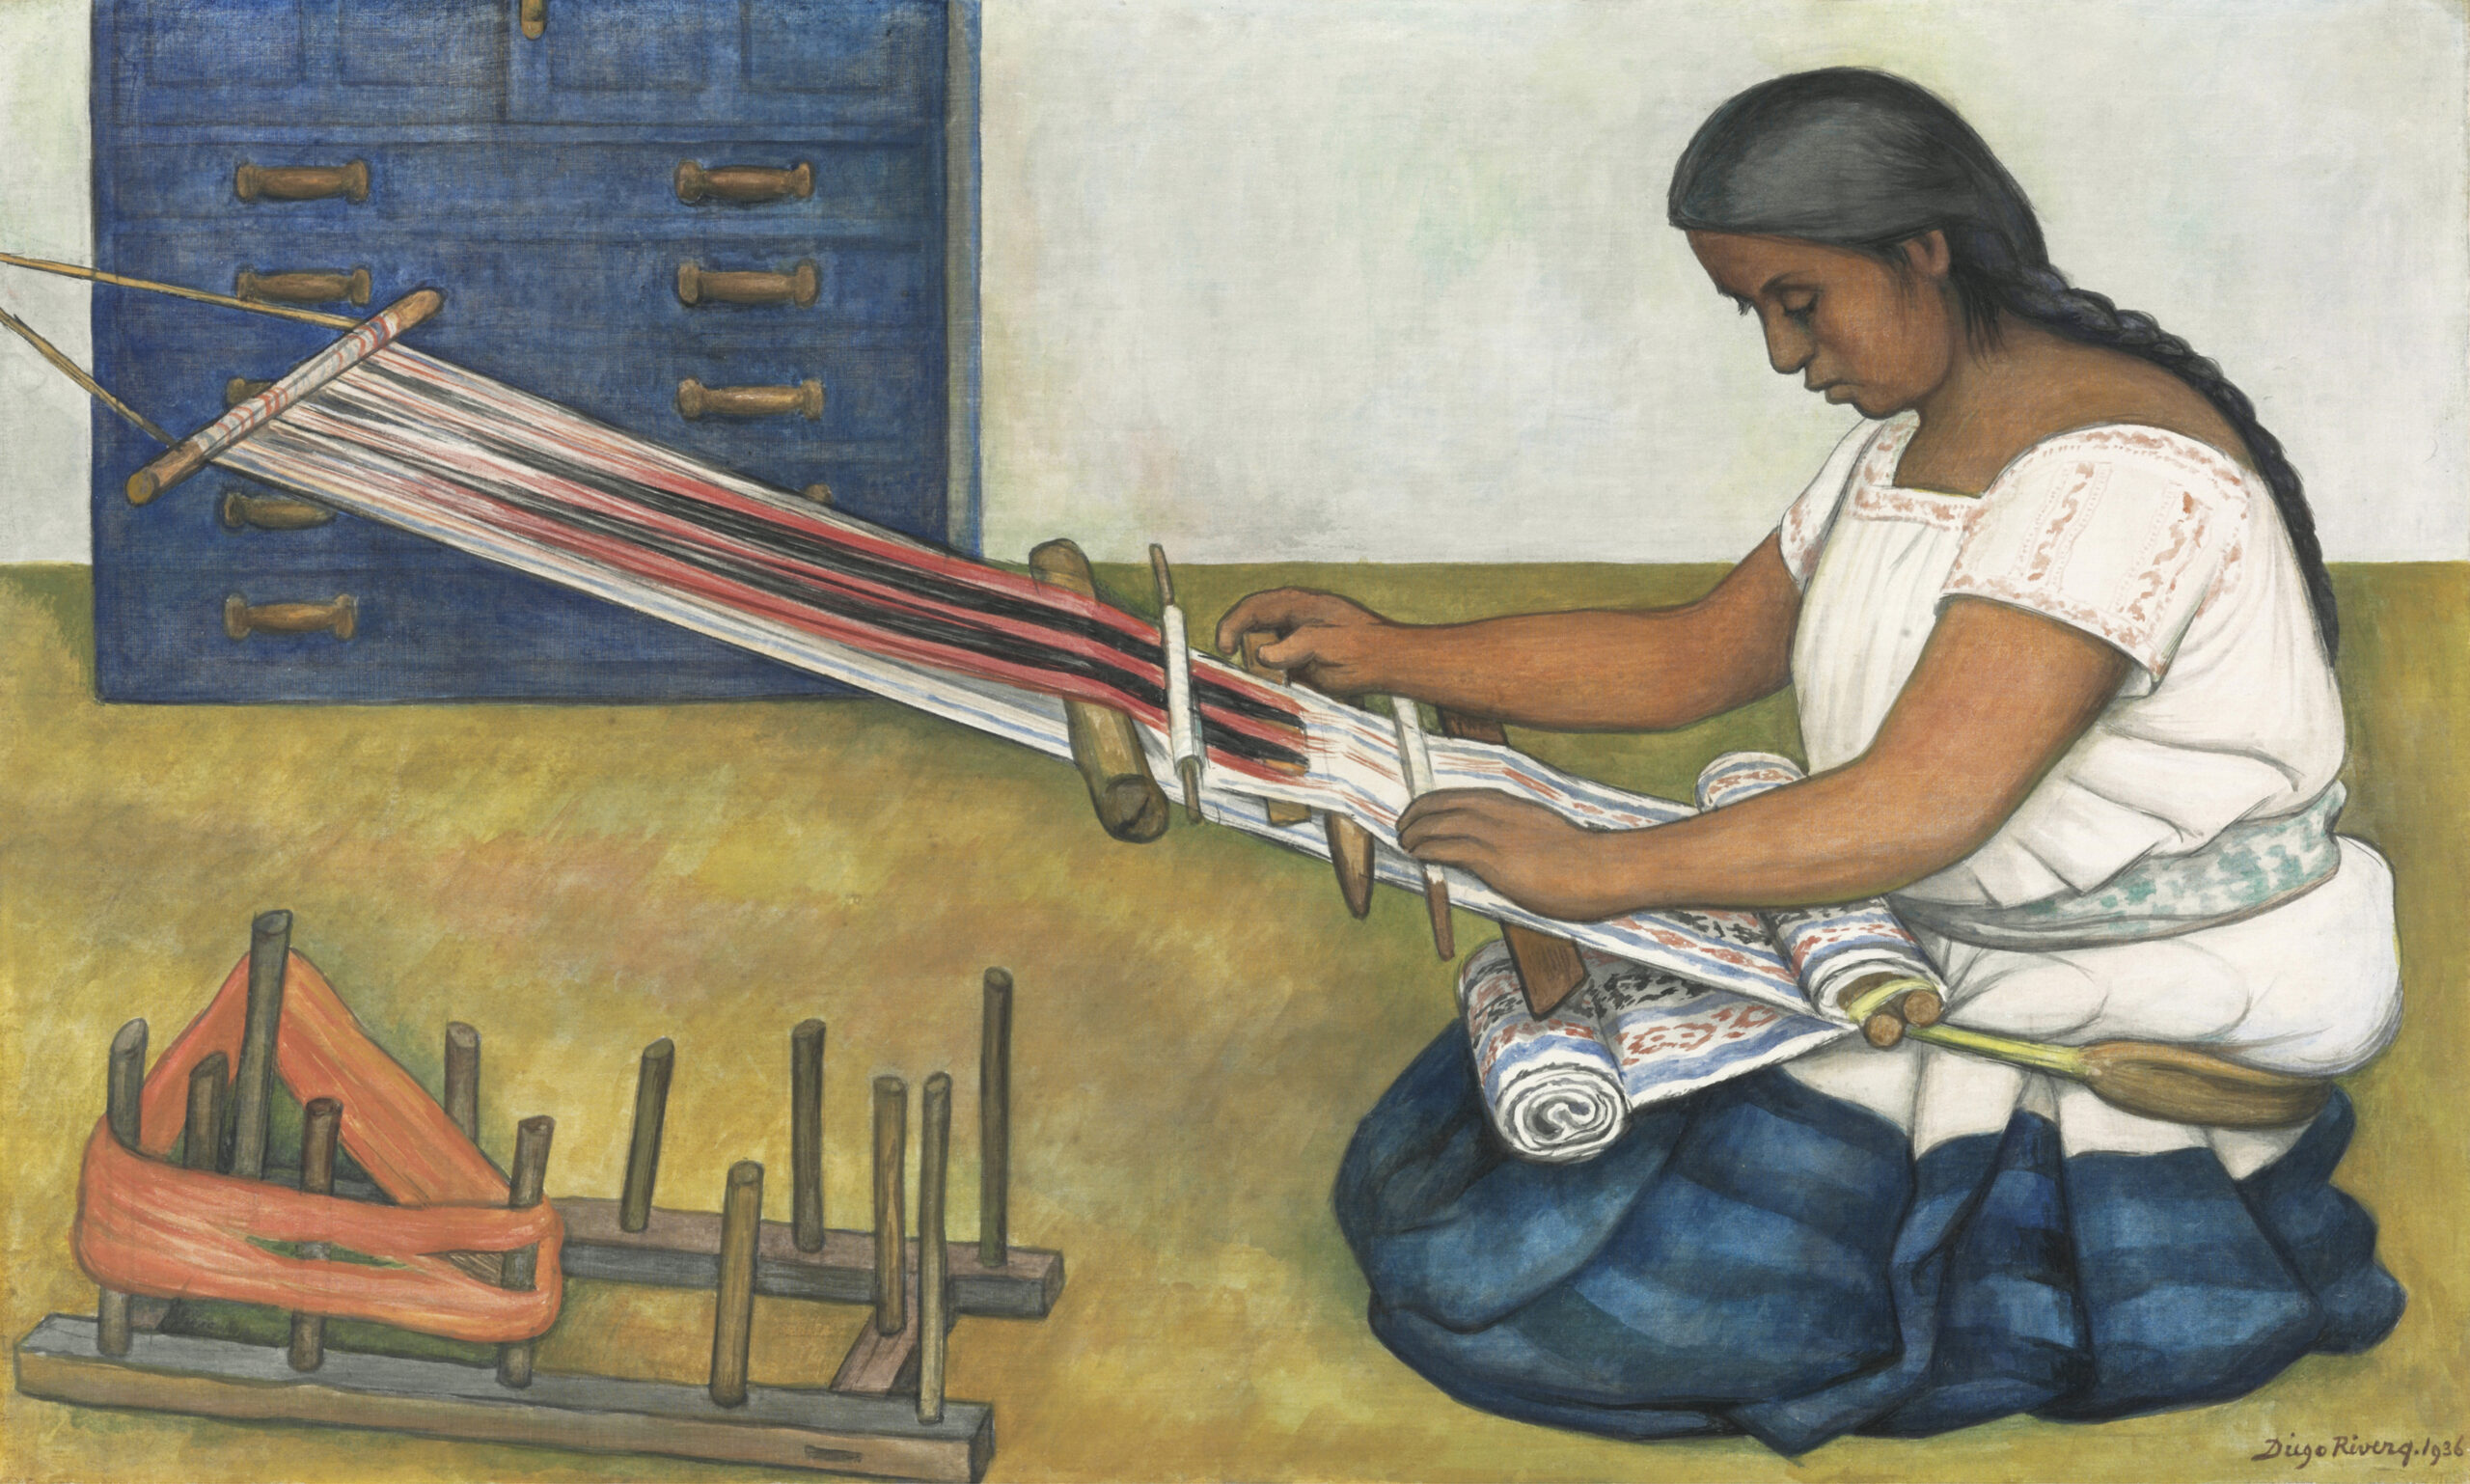 With many works new to the public, Museum of Modern Art’s Diego Rivera exhibit ruminates on class in America